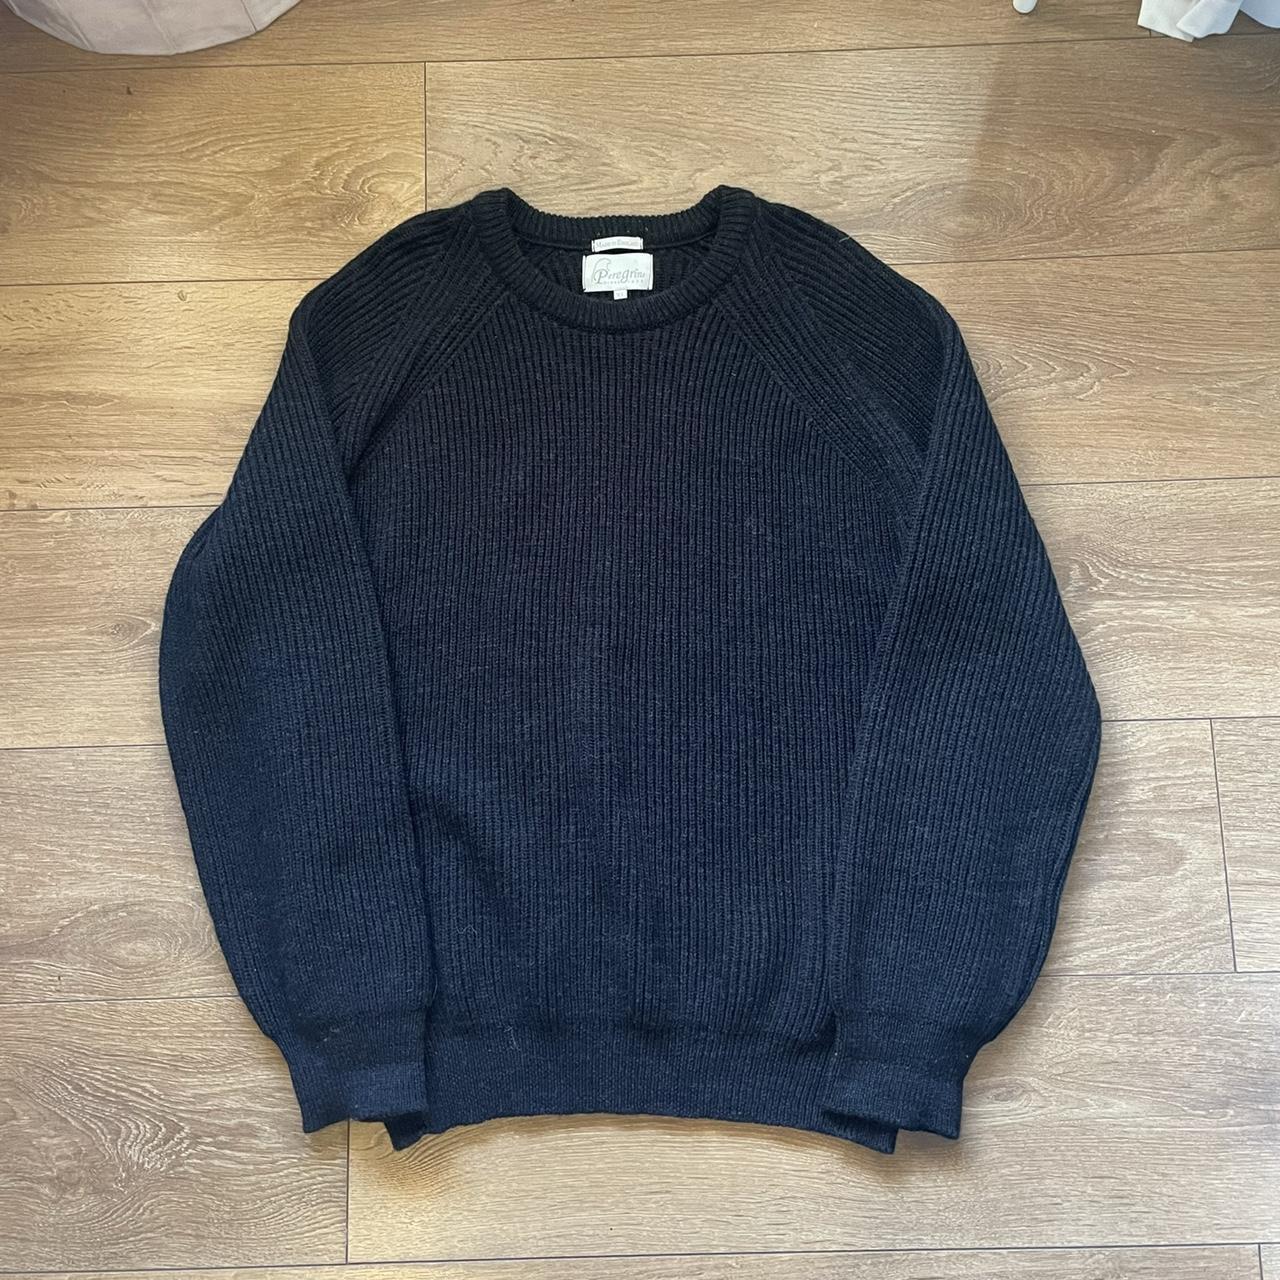 Peregrine Made in England Wool Jumper Size... - Depop